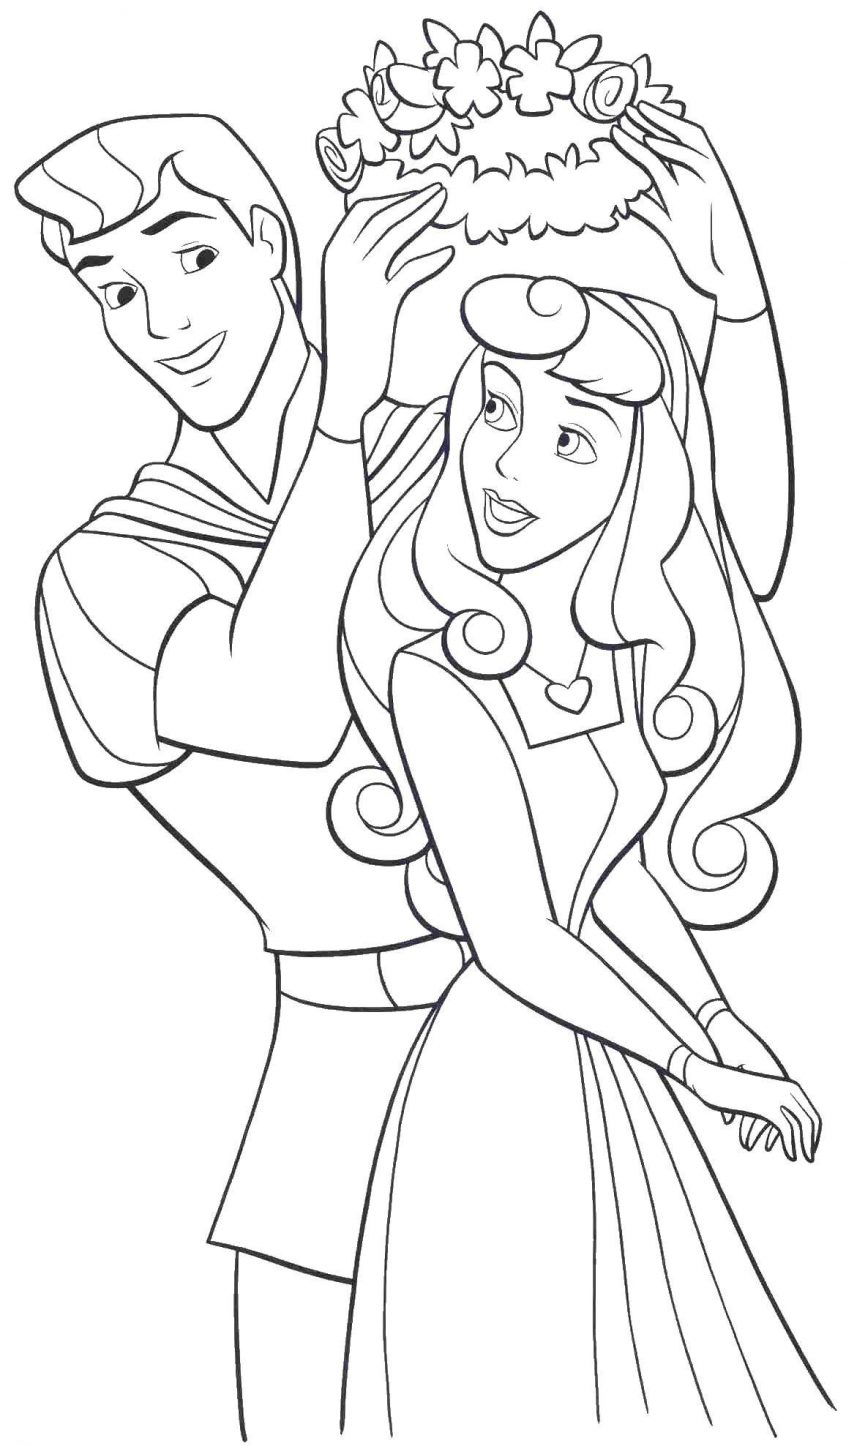 Princess Aurora Coloring Pages Free Coloring Prints I Avrora Disney Princess Aurora Coloring Pages